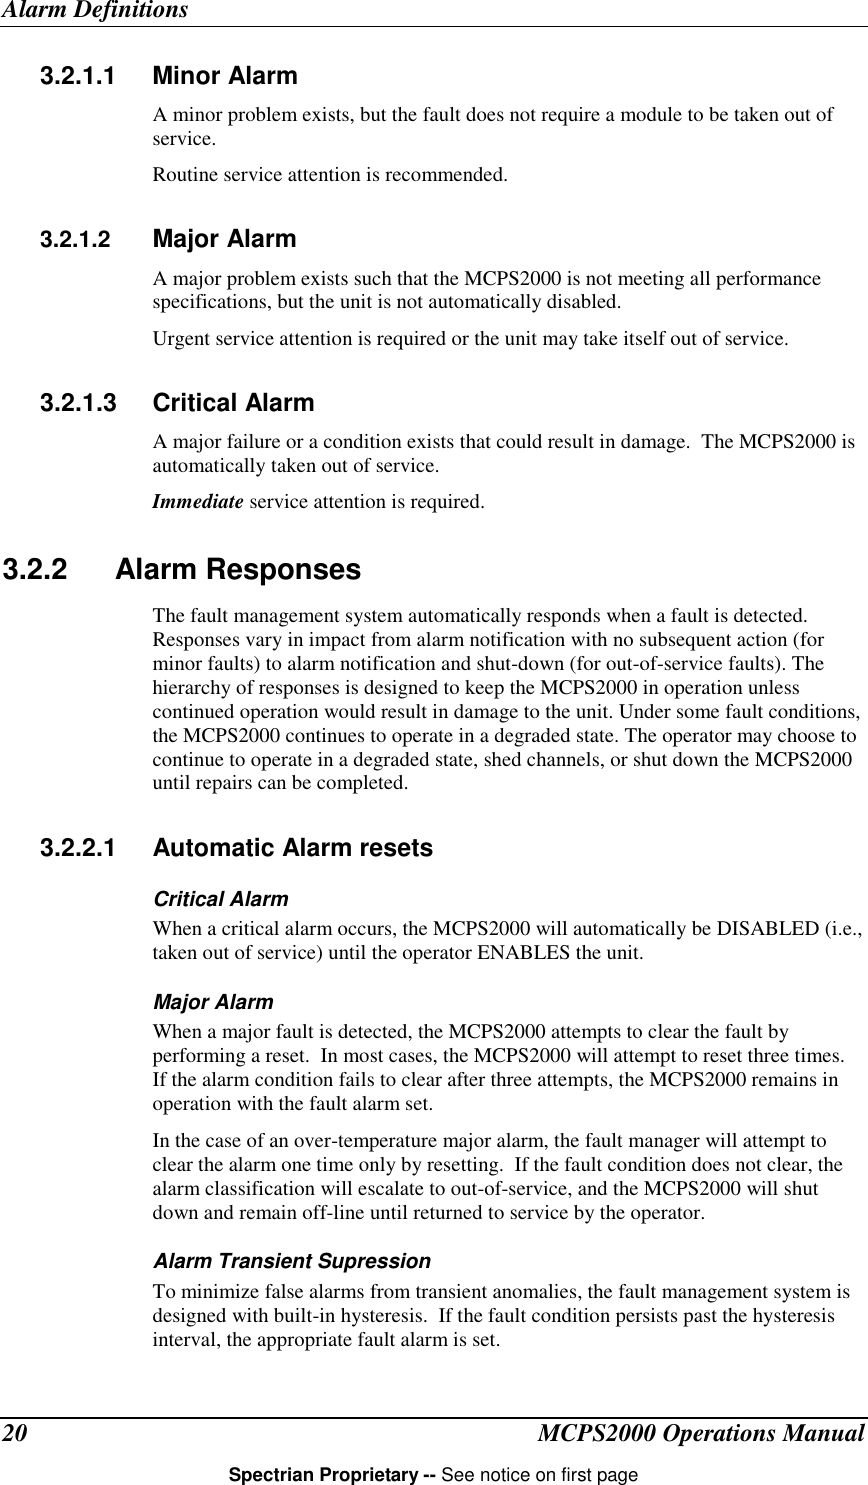 Alarm DefinitionsMCPS2000 Operations ManualSpectrian Proprietary -- See notice on first page203.2.1.1 Minor AlarmA minor problem exists, but the fault does not require a module to be taken out ofservice.Routine service attention is recommended.3.2.1.2  Major AlarmA major problem exists such that the MCPS2000 is not meeting all performancespecifications, but the unit is not automatically disabled.Urgent service attention is required or the unit may take itself out of service.3.2.1.3 Critical AlarmA major failure or a condition exists that could result in damage.  The MCPS2000 isautomatically taken out of service.Immediate service attention is required.3.2.2 Alarm ResponsesThe fault management system automatically responds when a fault is detected.Responses vary in impact from alarm notification with no subsequent action (forminor faults) to alarm notification and shut-down (for out-of-service faults). Thehierarchy of responses is designed to keep the MCPS2000 in operation unlesscontinued operation would result in damage to the unit. Under some fault conditions,the MCPS2000 continues to operate in a degraded state. The operator may choose tocontinue to operate in a degraded state, shed channels, or shut down the MCPS2000until repairs can be completed.3.2.2.1 Automatic Alarm resetsCritical AlarmWhen a critical alarm occurs, the MCPS2000 will automatically be DISABLED (i.e.,taken out of service) until the operator ENABLES the unit.Major AlarmWhen a major fault is detected, the MCPS2000 attempts to clear the fault byperforming a reset.  In most cases, the MCPS2000 will attempt to reset three times.If the alarm condition fails to clear after three attempts, the MCPS2000 remains inoperation with the fault alarm set.In the case of an over-temperature major alarm, the fault manager will attempt toclear the alarm one time only by resetting.  If the fault condition does not clear, thealarm classification will escalate to out-of-service, and the MCPS2000 will shutdown and remain off-line until returned to service by the operator.Alarm Transient SupressionTo minimize false alarms from transient anomalies, the fault management system isdesigned with built-in hysteresis.  If the fault condition persists past the hysteresisinterval, the appropriate fault alarm is set.